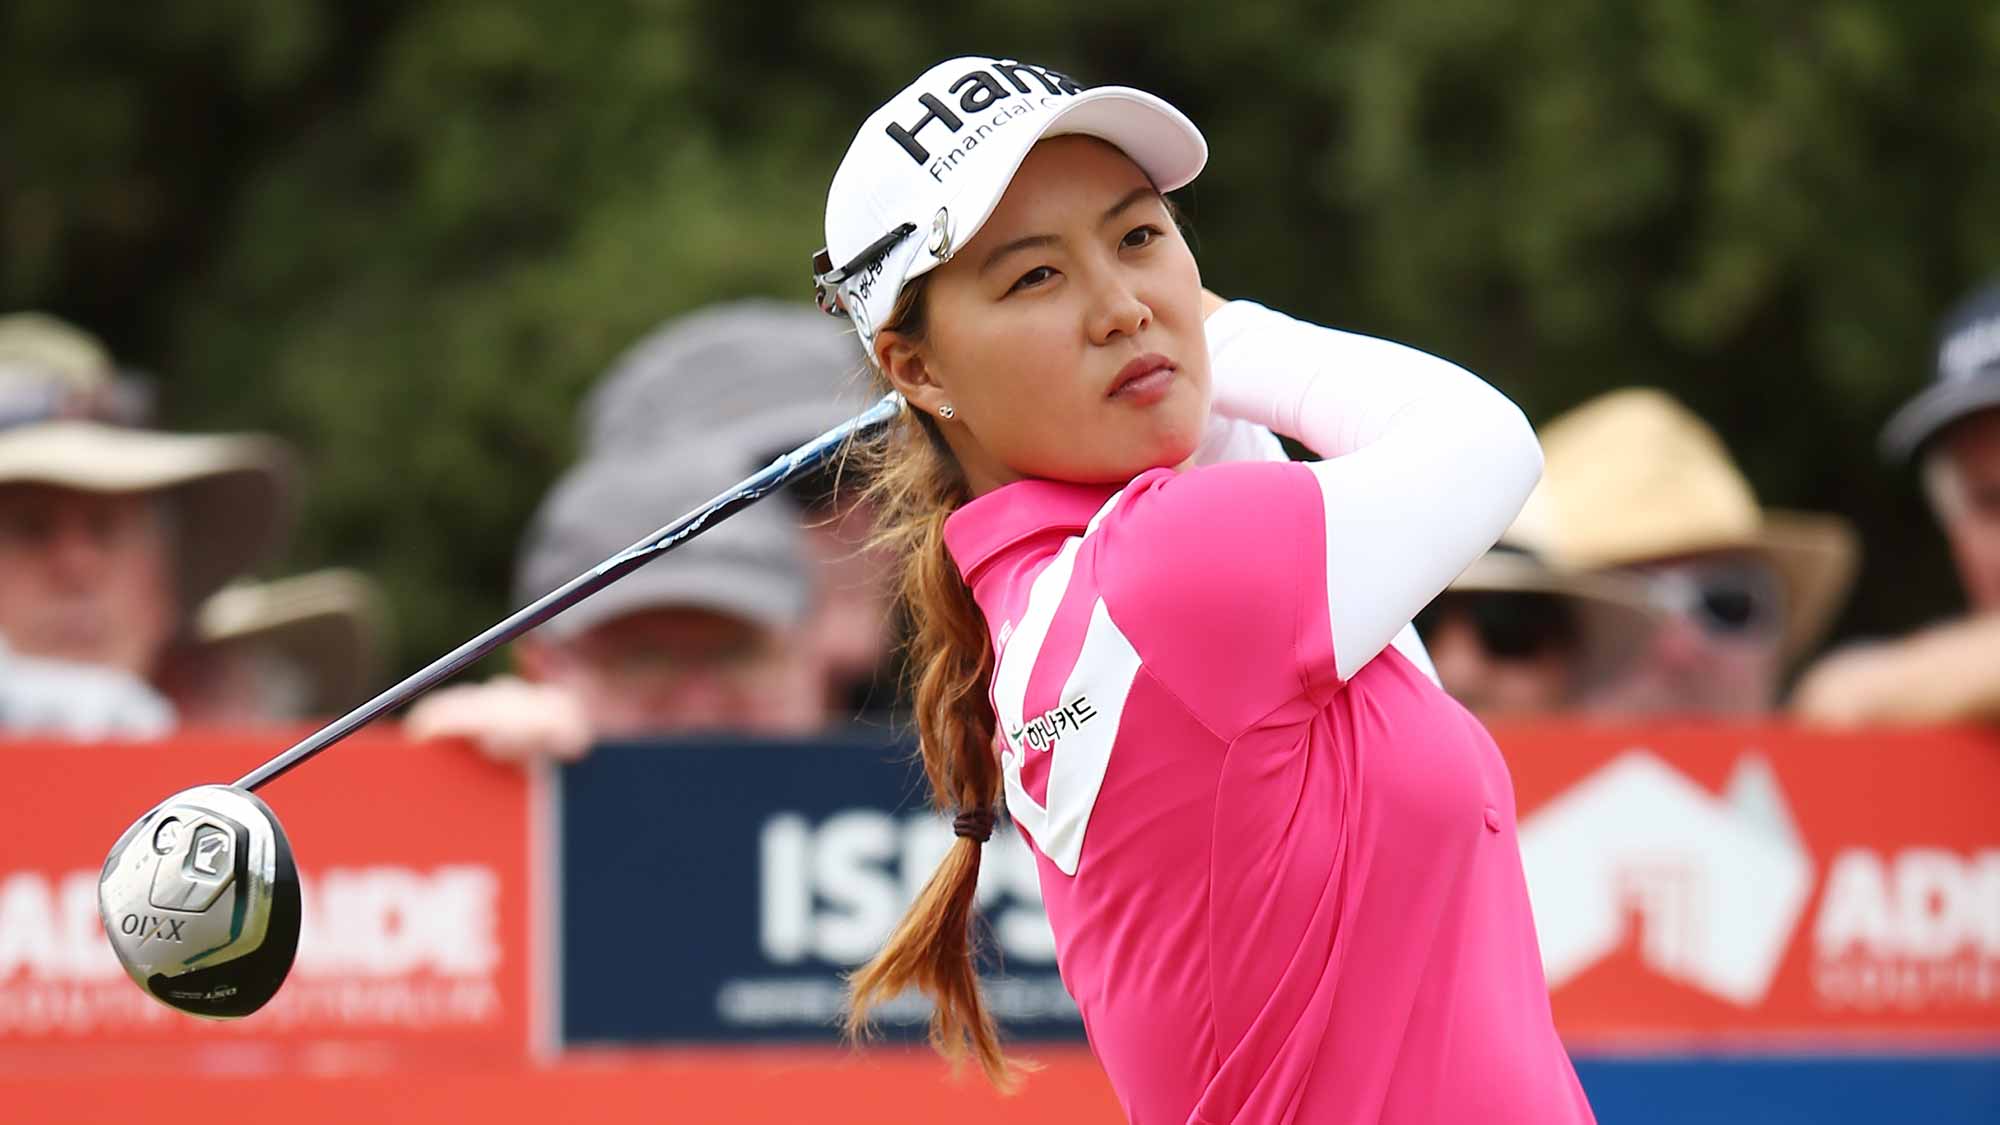 Minjee Lee of Australia competes during day two of the ISPS Handa Women's Australian Open